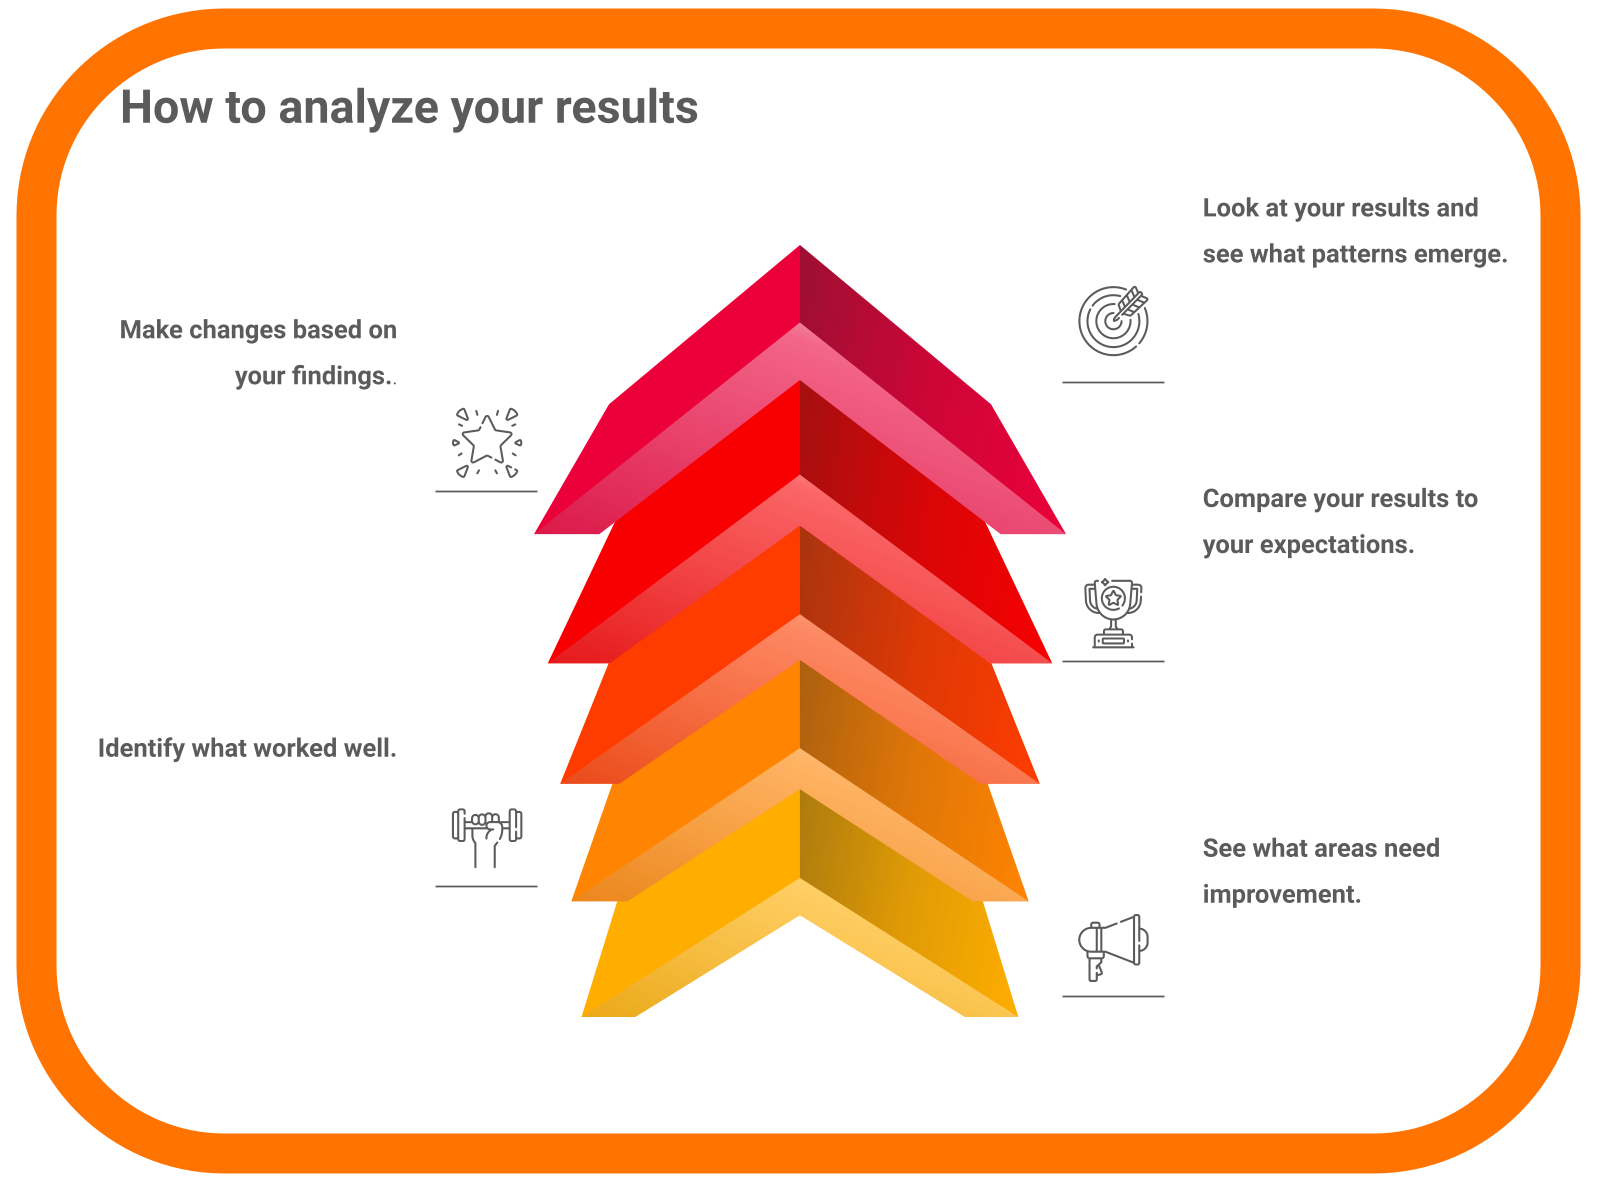 How to analyze your results